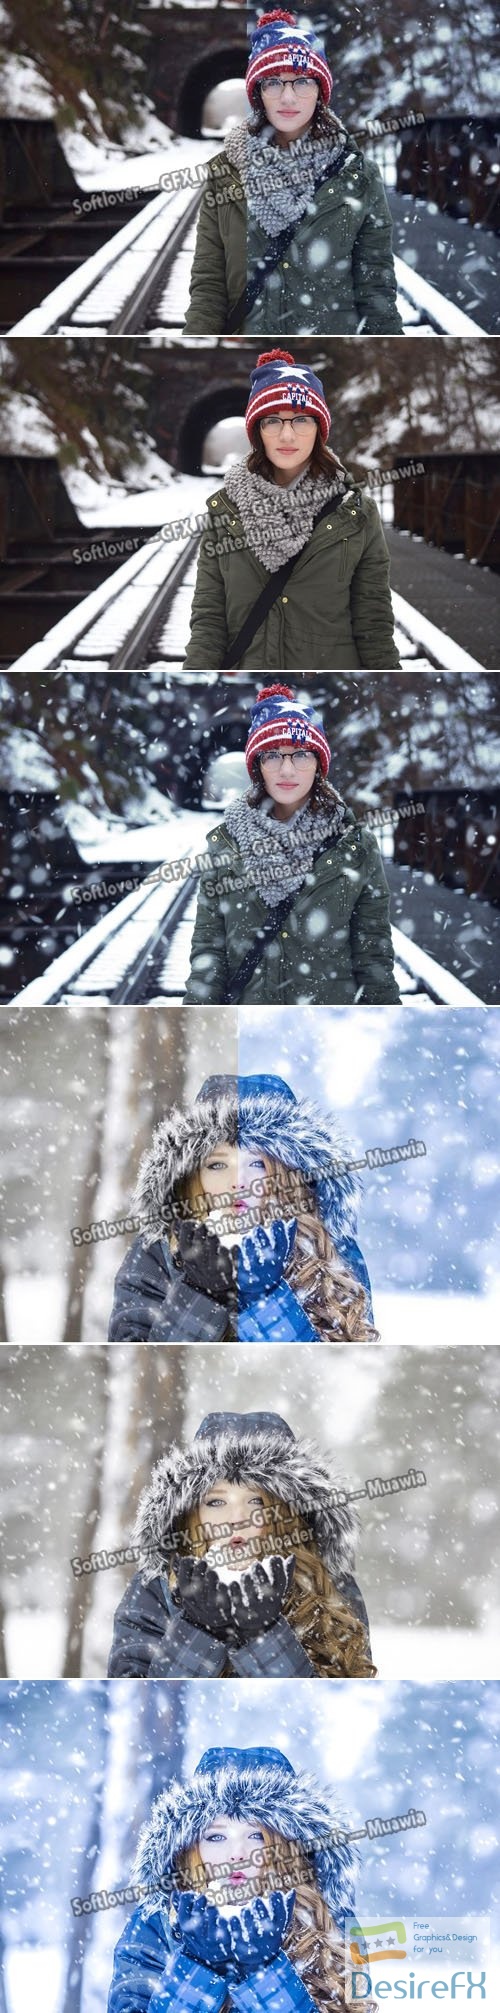 5 Realistic Snow Photoshop Actions & Effects + Tutorial